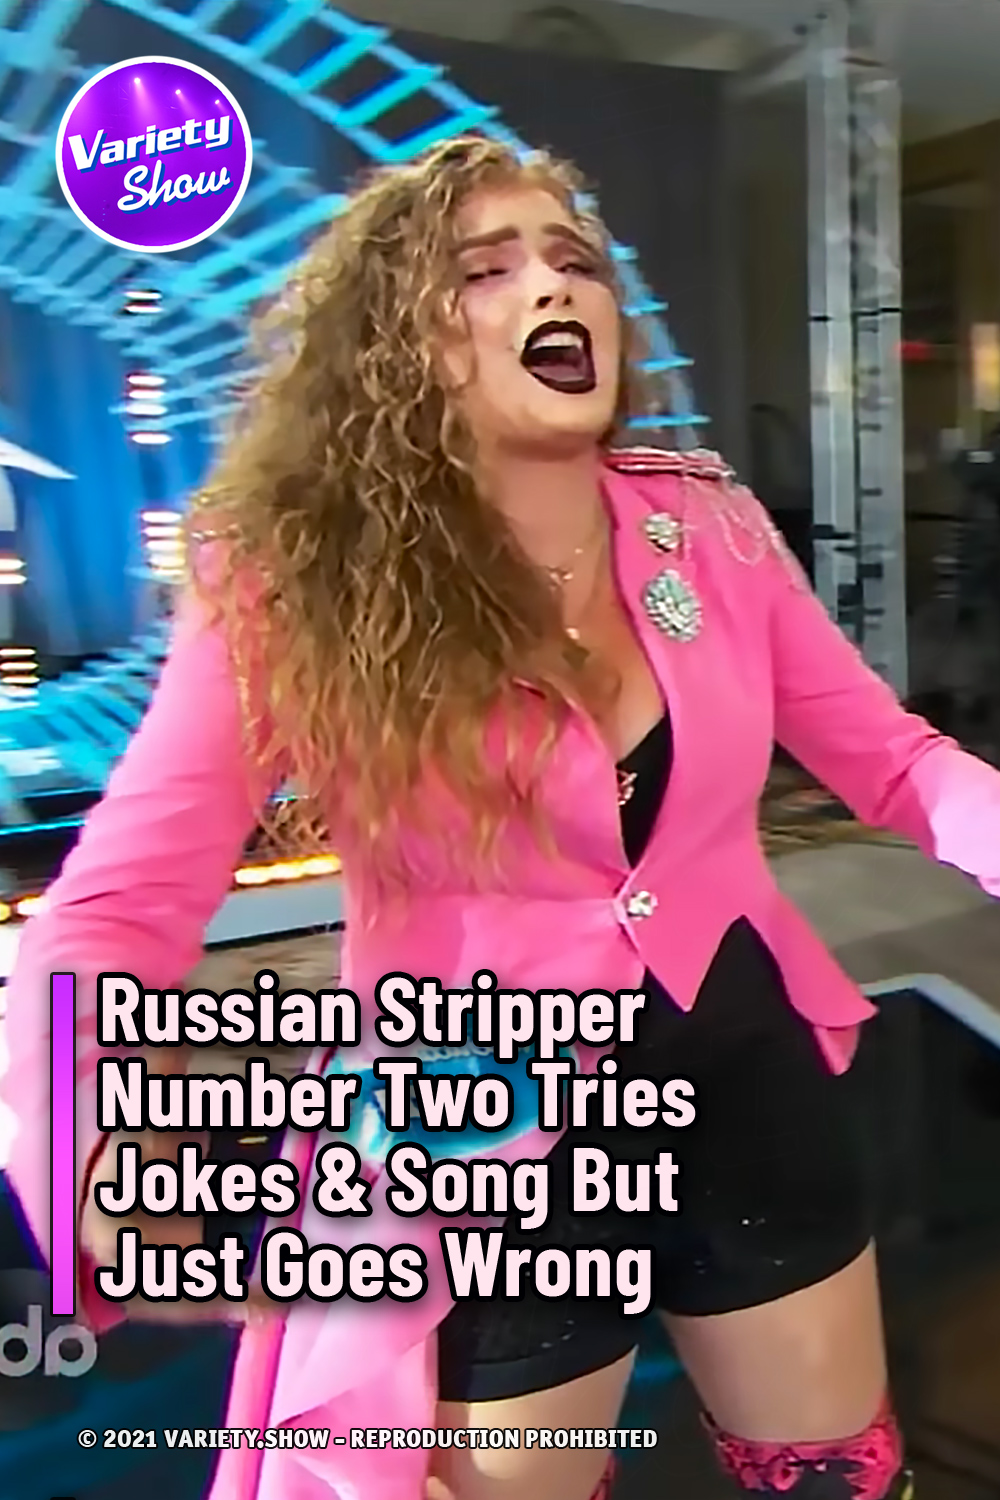 Russian Stripper Number Two Tries Jokes & Song But Just Goes Wrong